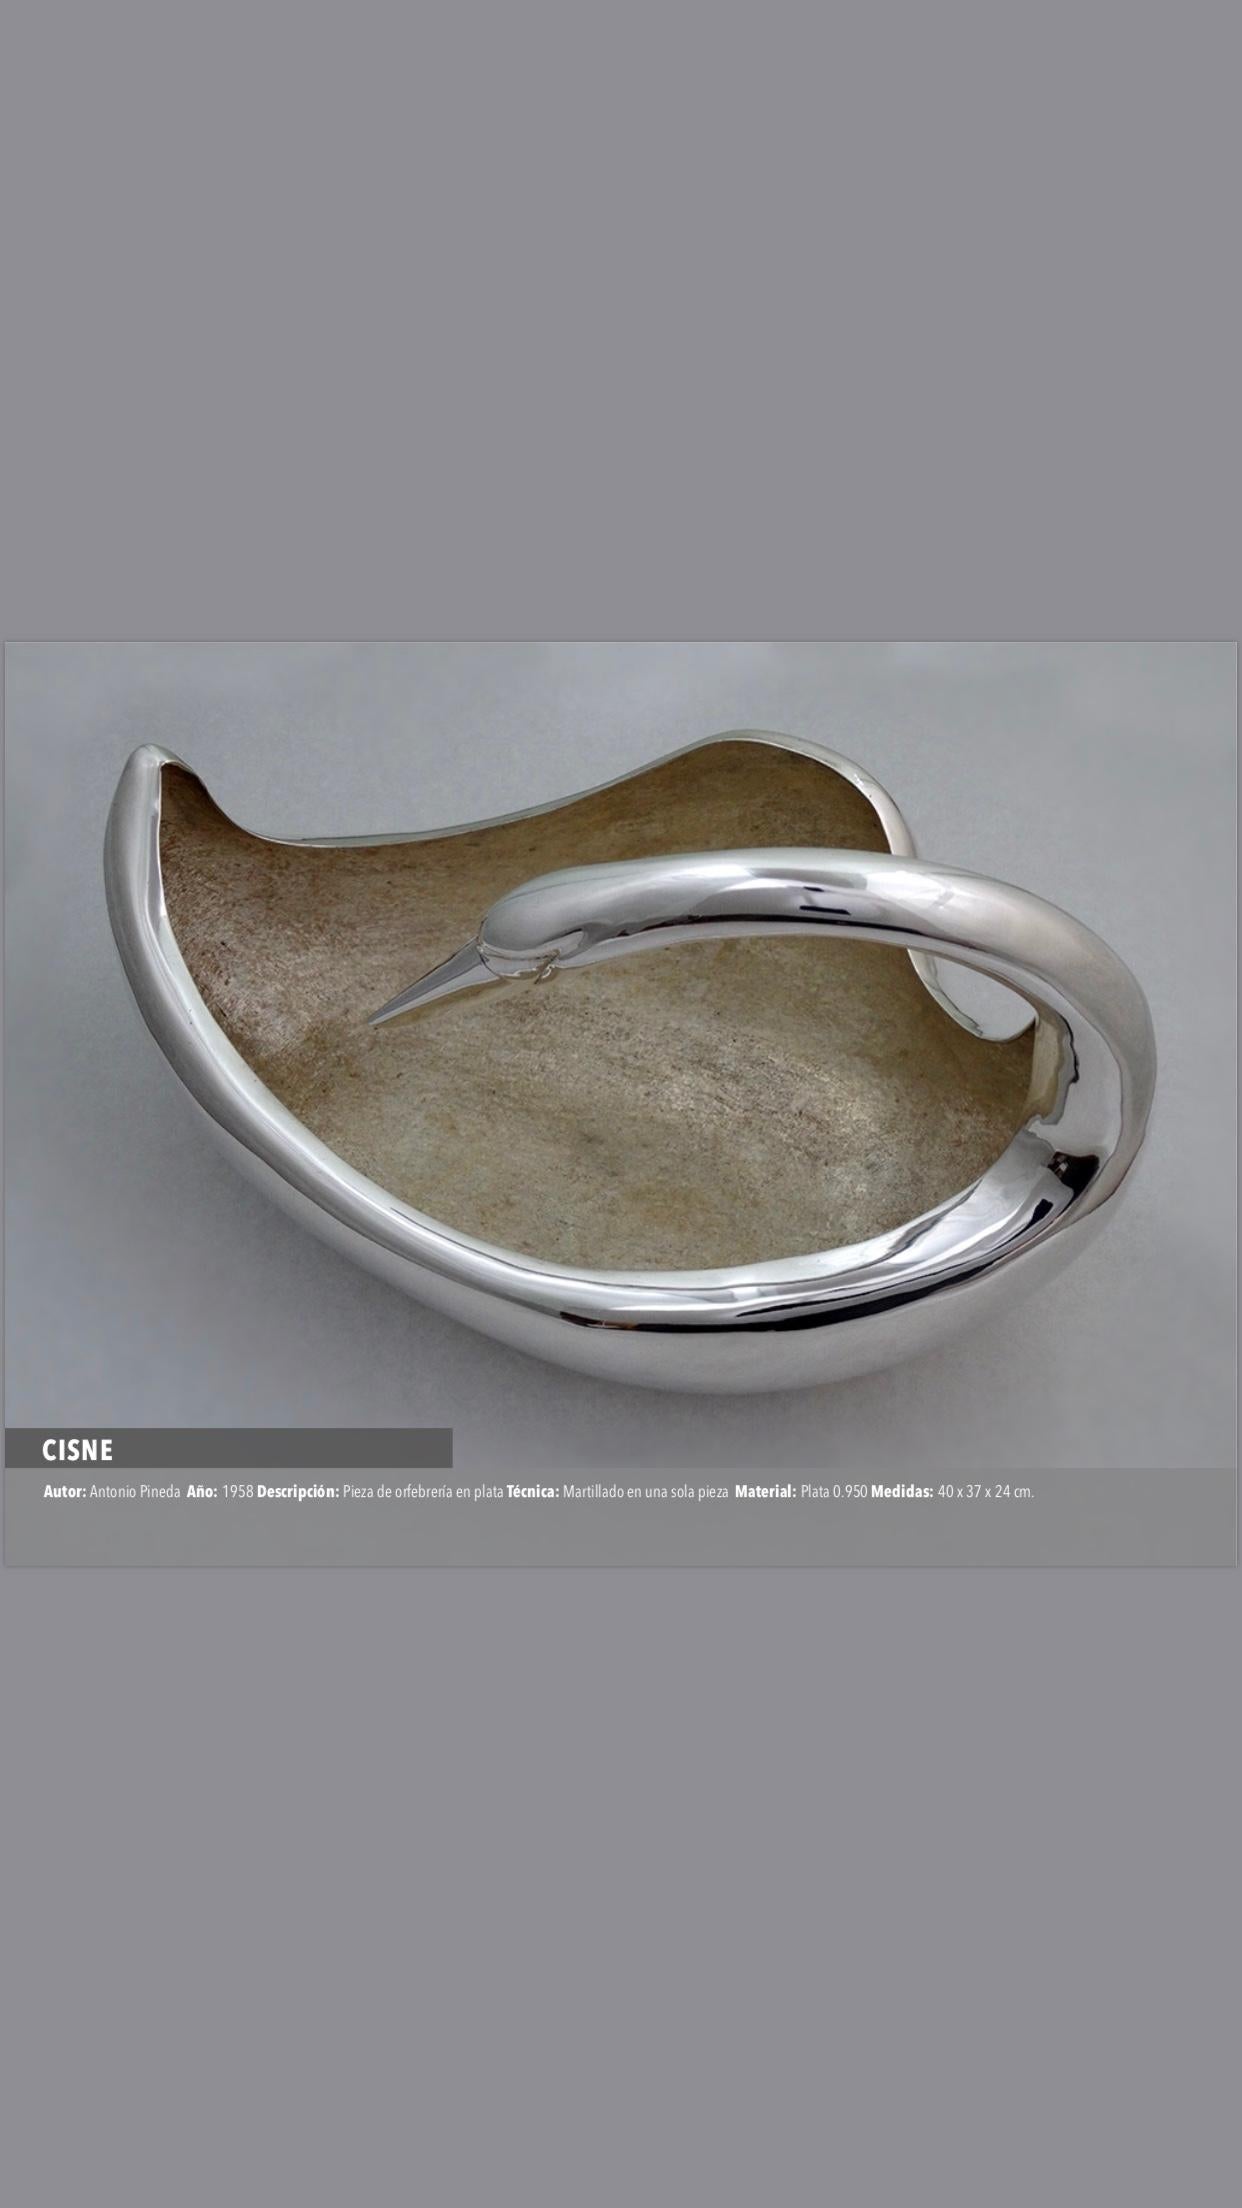 Piece of goldsmith in silver, made in 1958 by Antonio Pineda. the technique hammered in one piece, sterling silver .950